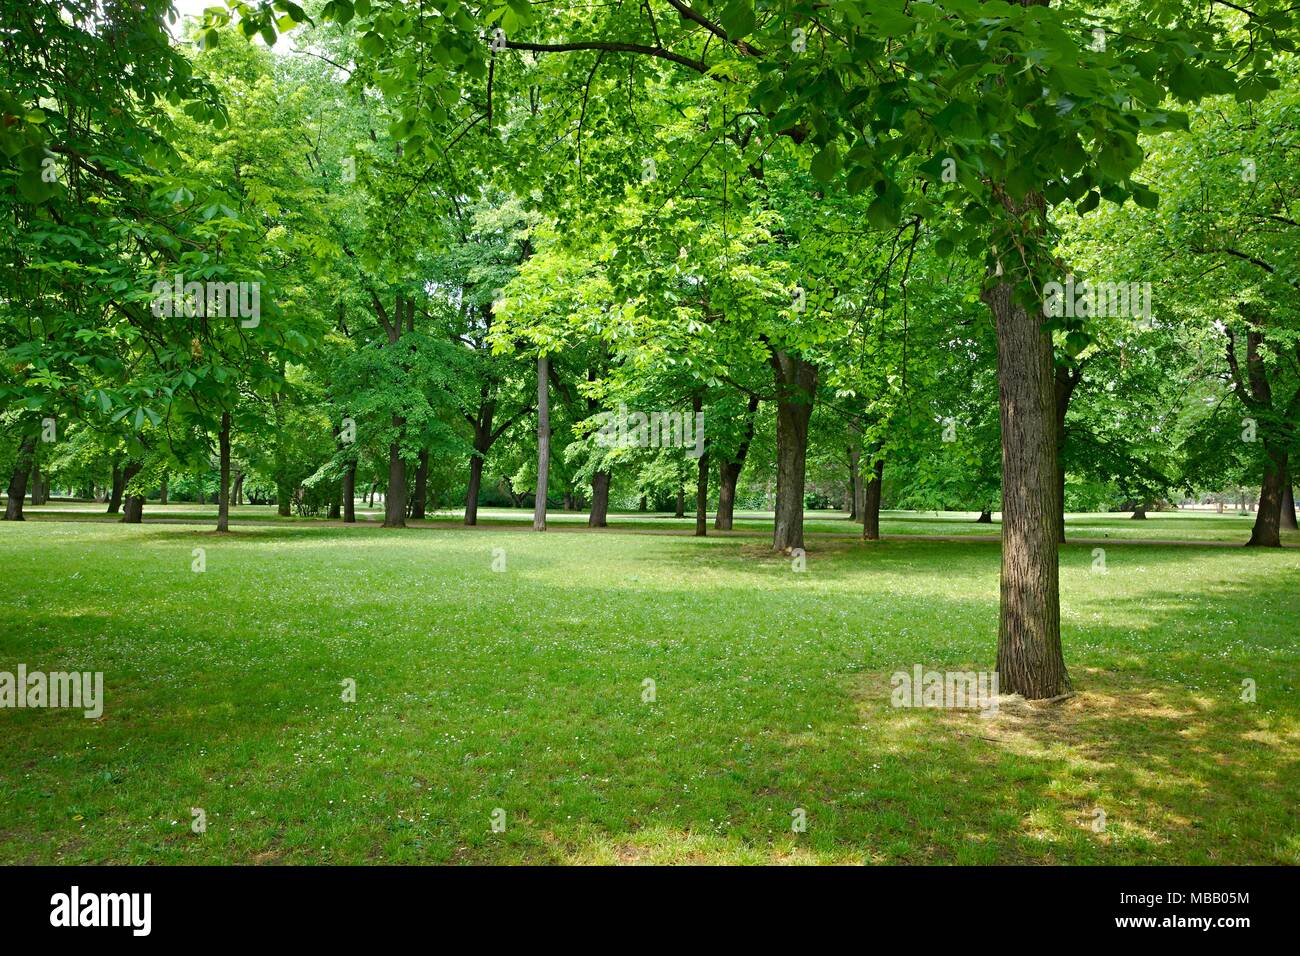 Green trees in a park Stock Photo